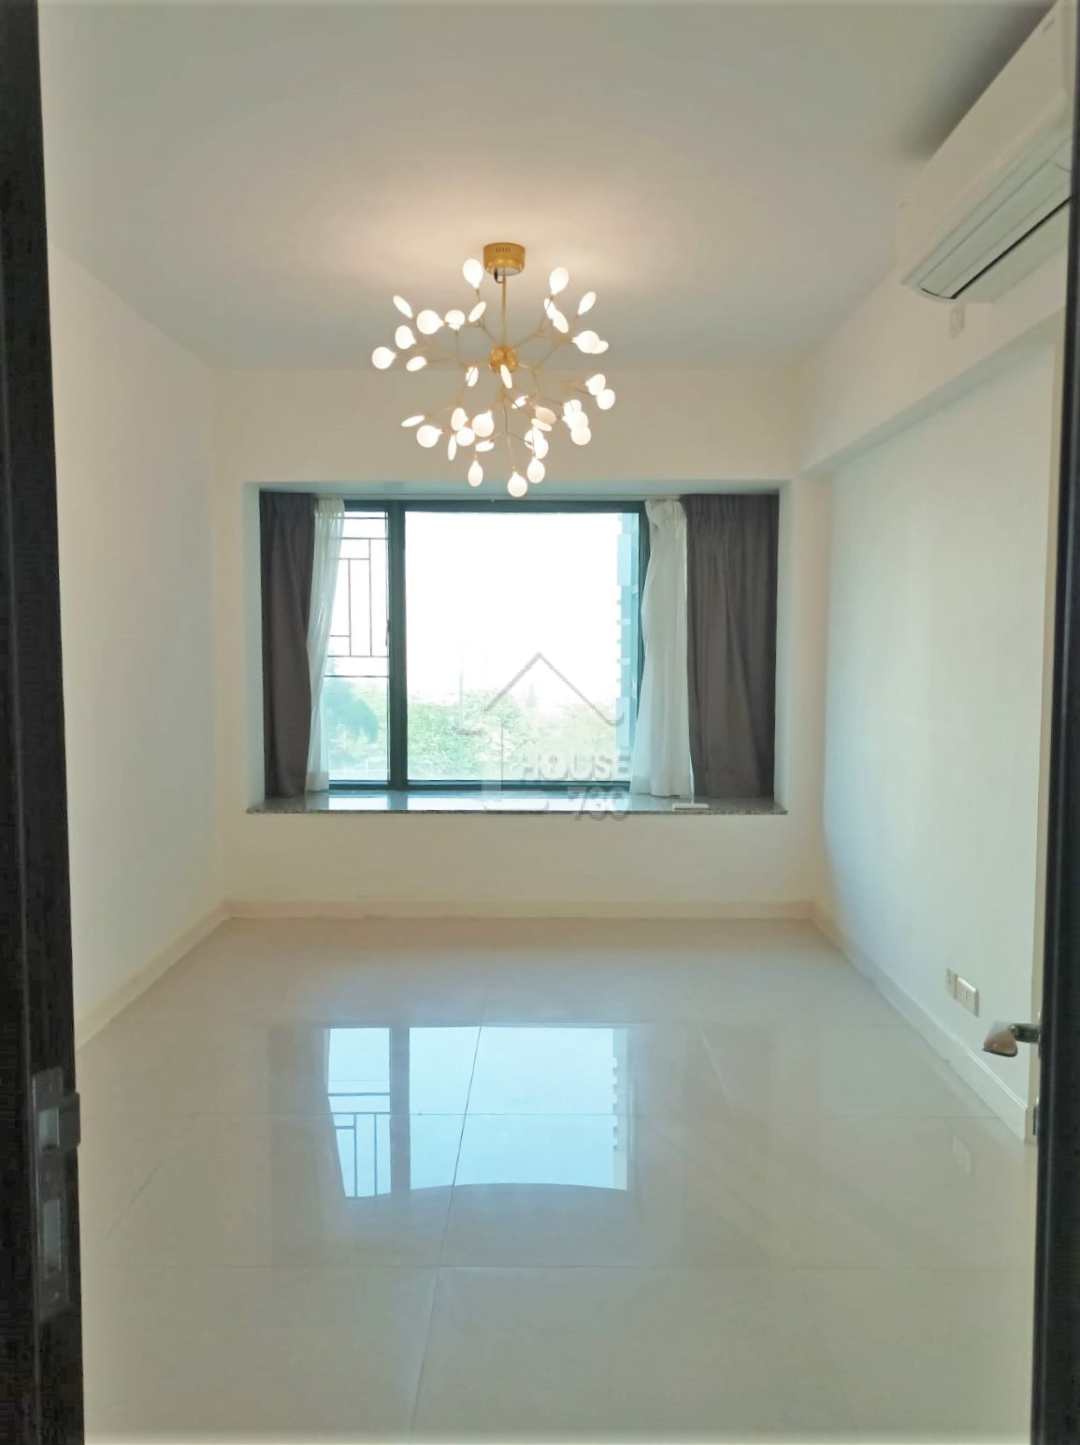 Kowloon Tong MERIDIAN HILL Middle Floor Master Room House730-6174434